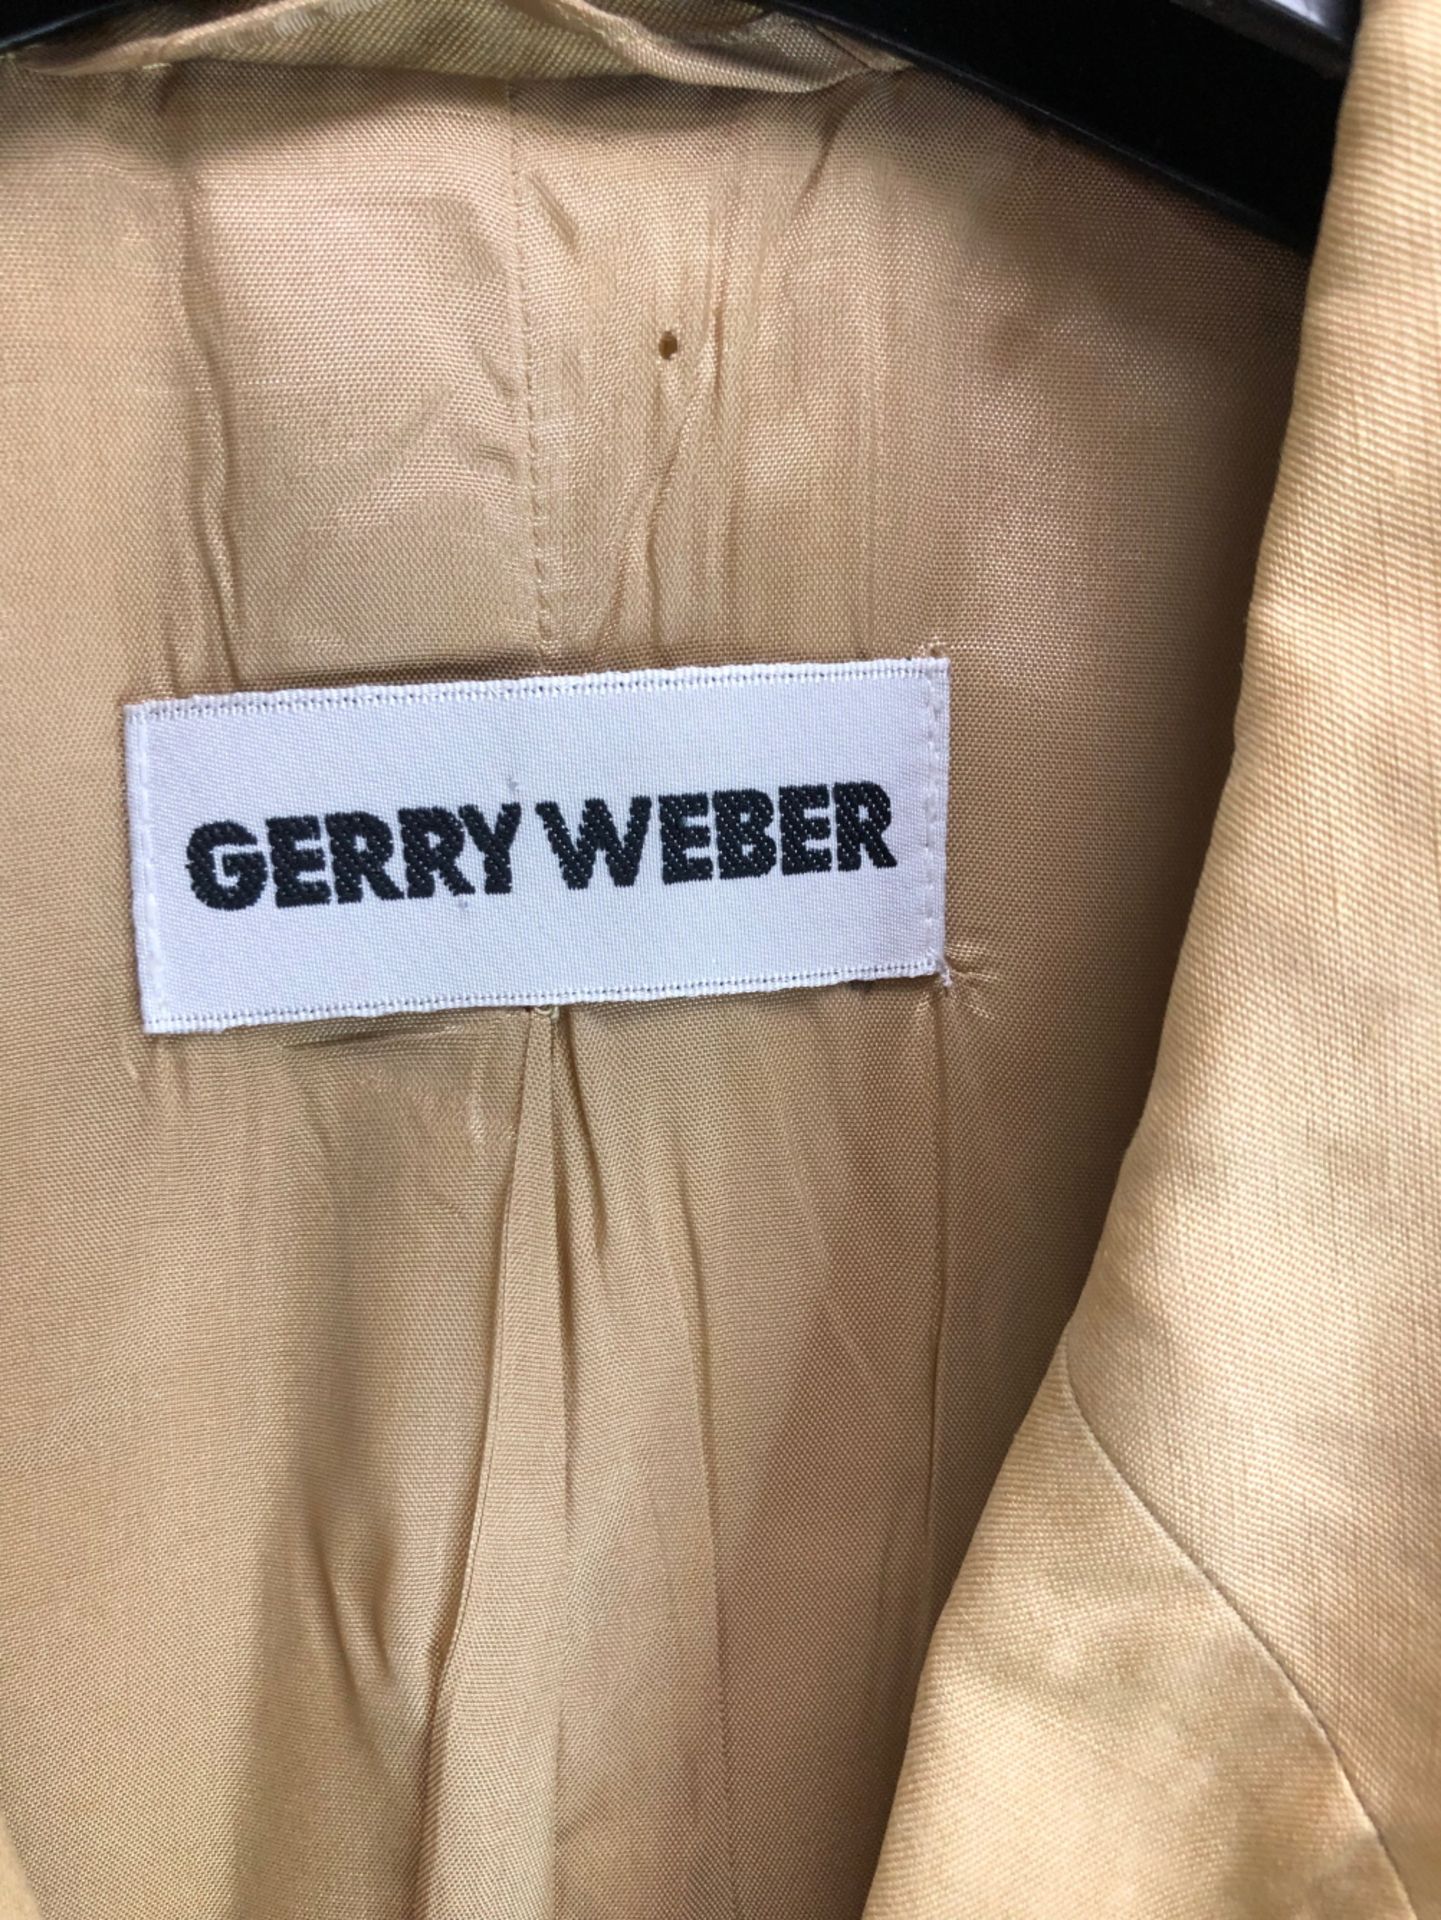 A GERRY WEBER PALE YELLOW SILK AND LINEN BLEND JACKET, SIZE ON TAG 36, TWO JOBIS CHECK PATTERN - Image 3 of 11